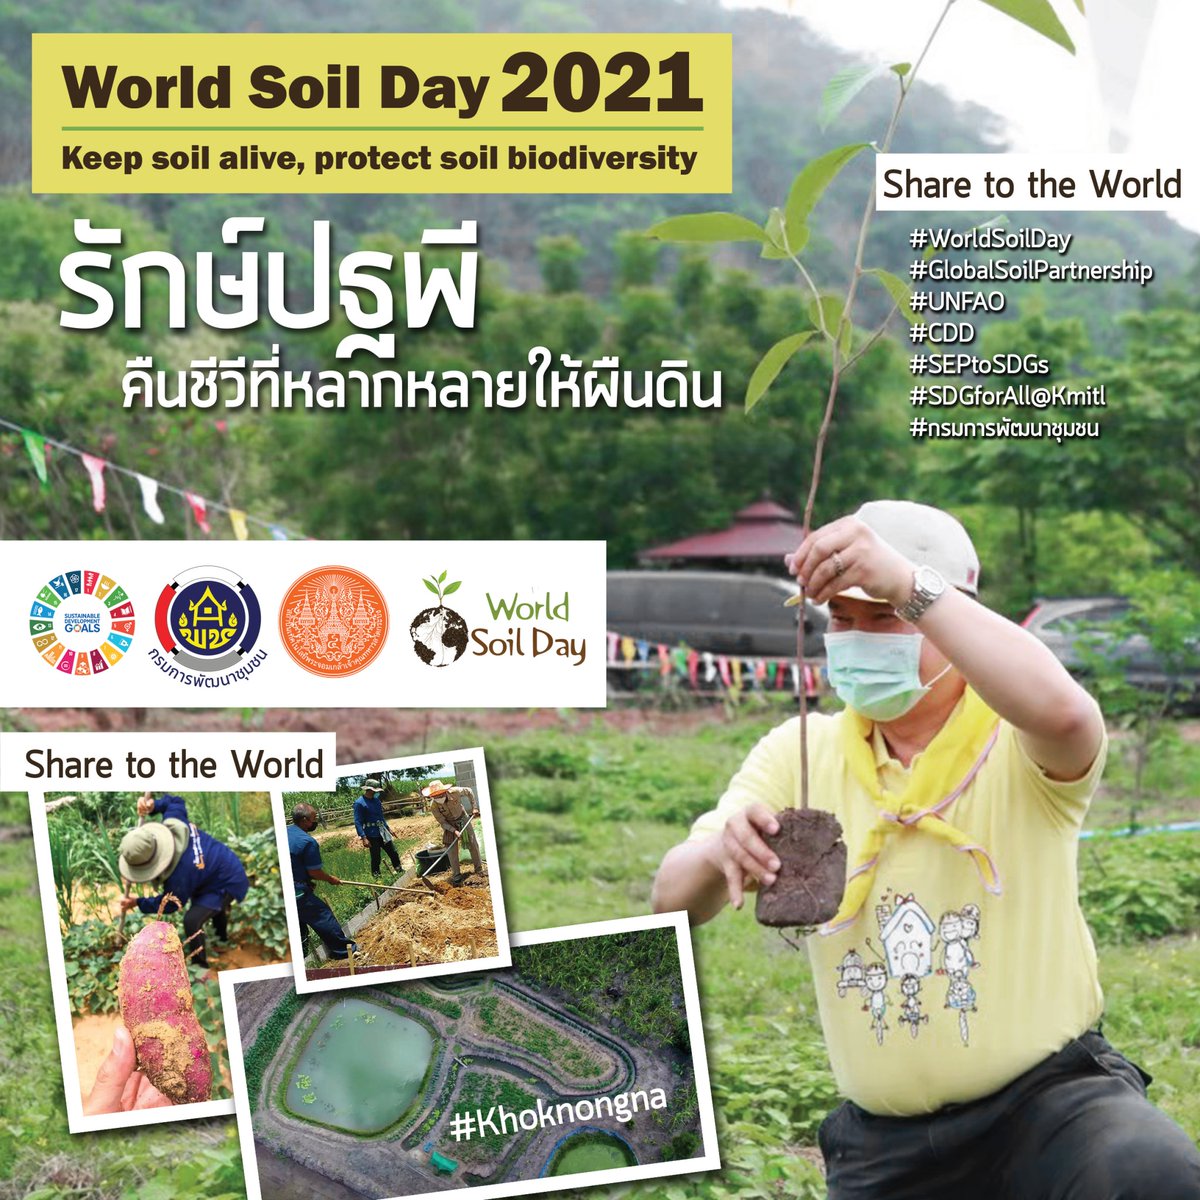 Do what you can do as well as you can do it every day of your life, and you will end up dying one of the happiest individuals that have ever died.

#WorldSoilDay #UNFAO
#GlobalSoilPartnership
#กรมการพัฒนาชุมชน
#SDGforAll@Kmitl
#SEPtoSDGs